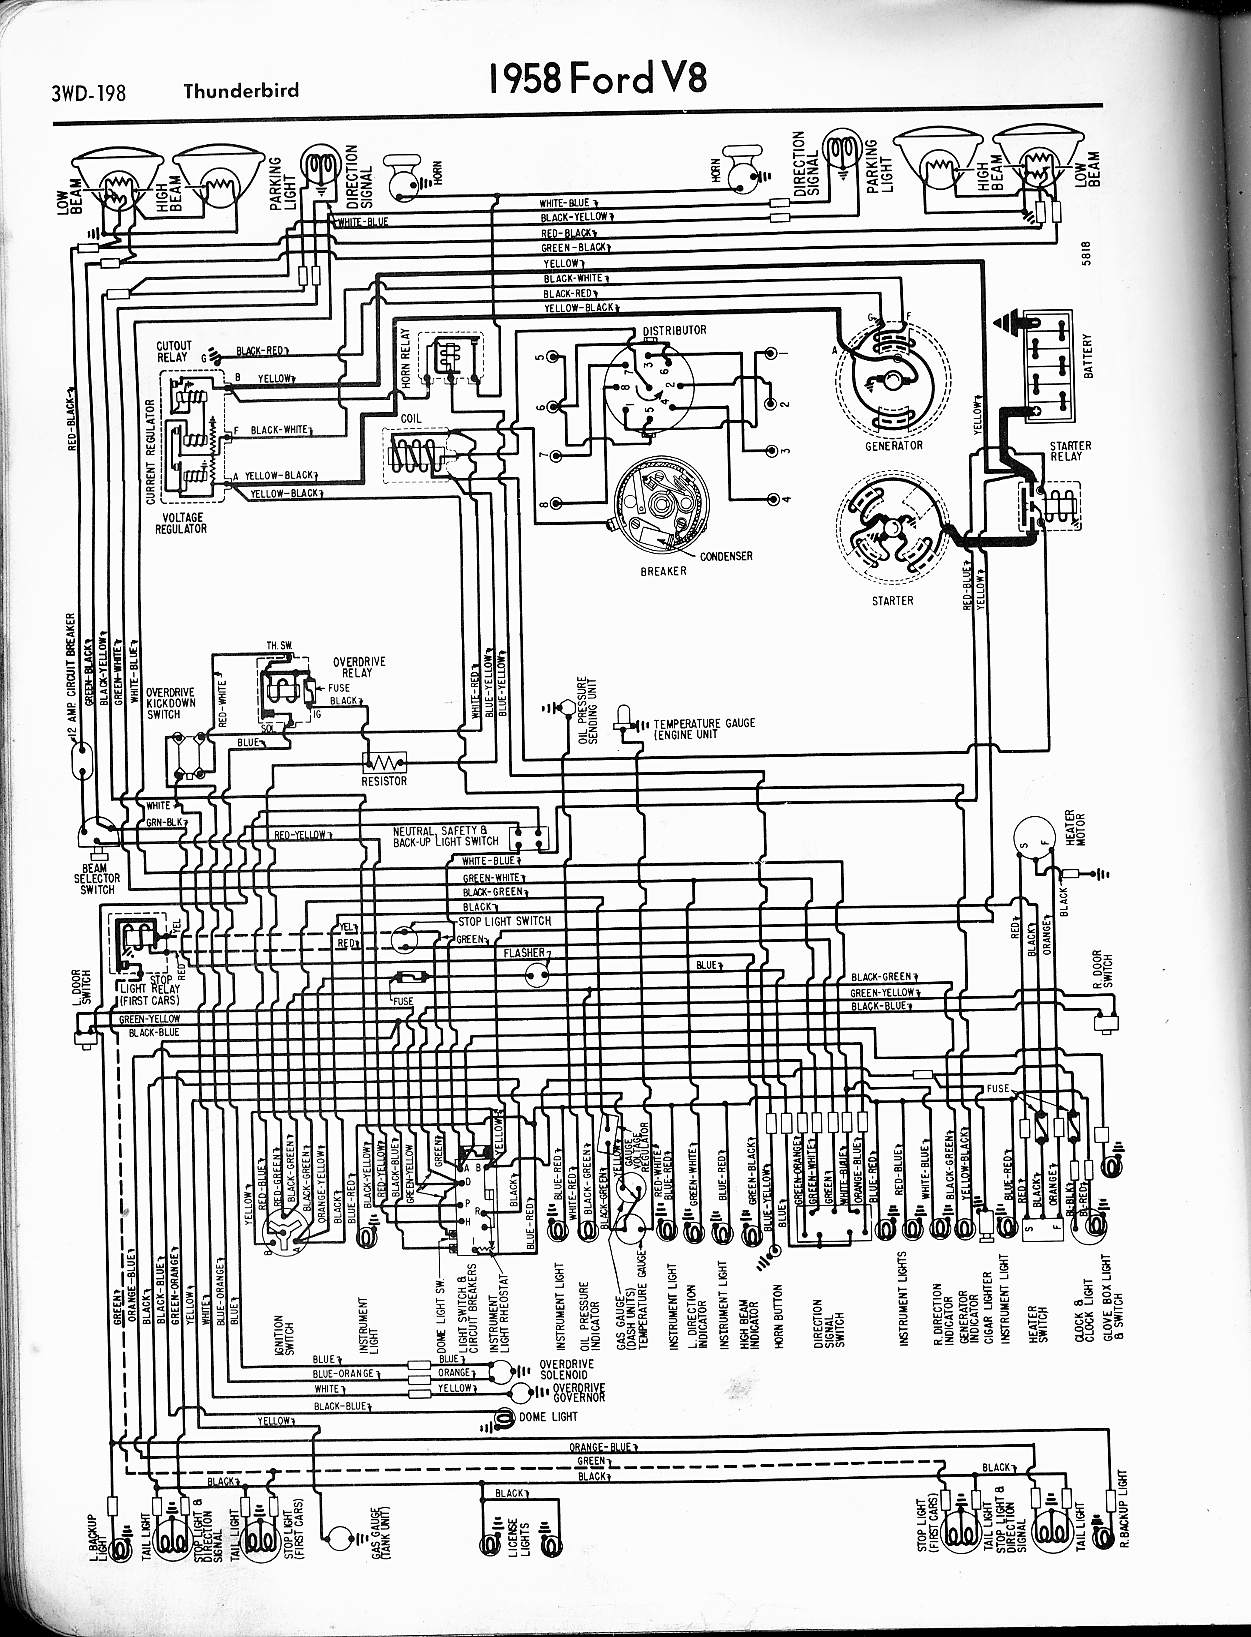 57-65 Ford Wiring Diagrams